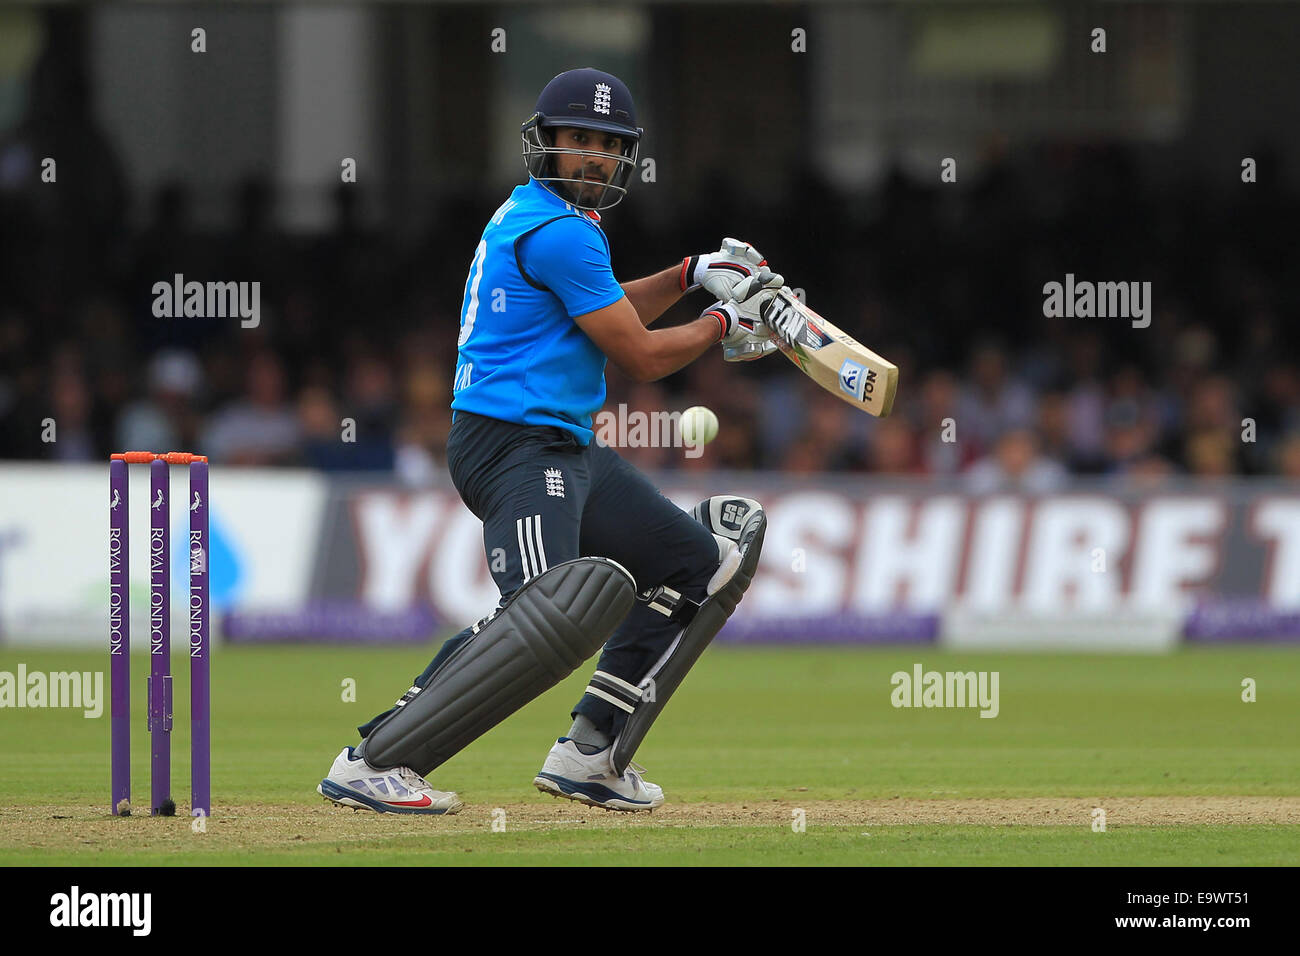 Cricket - Ravi Bopara of England bats during the Royal London One-Day match against Sri Lanka at Lord's in 2014 Stock Photo